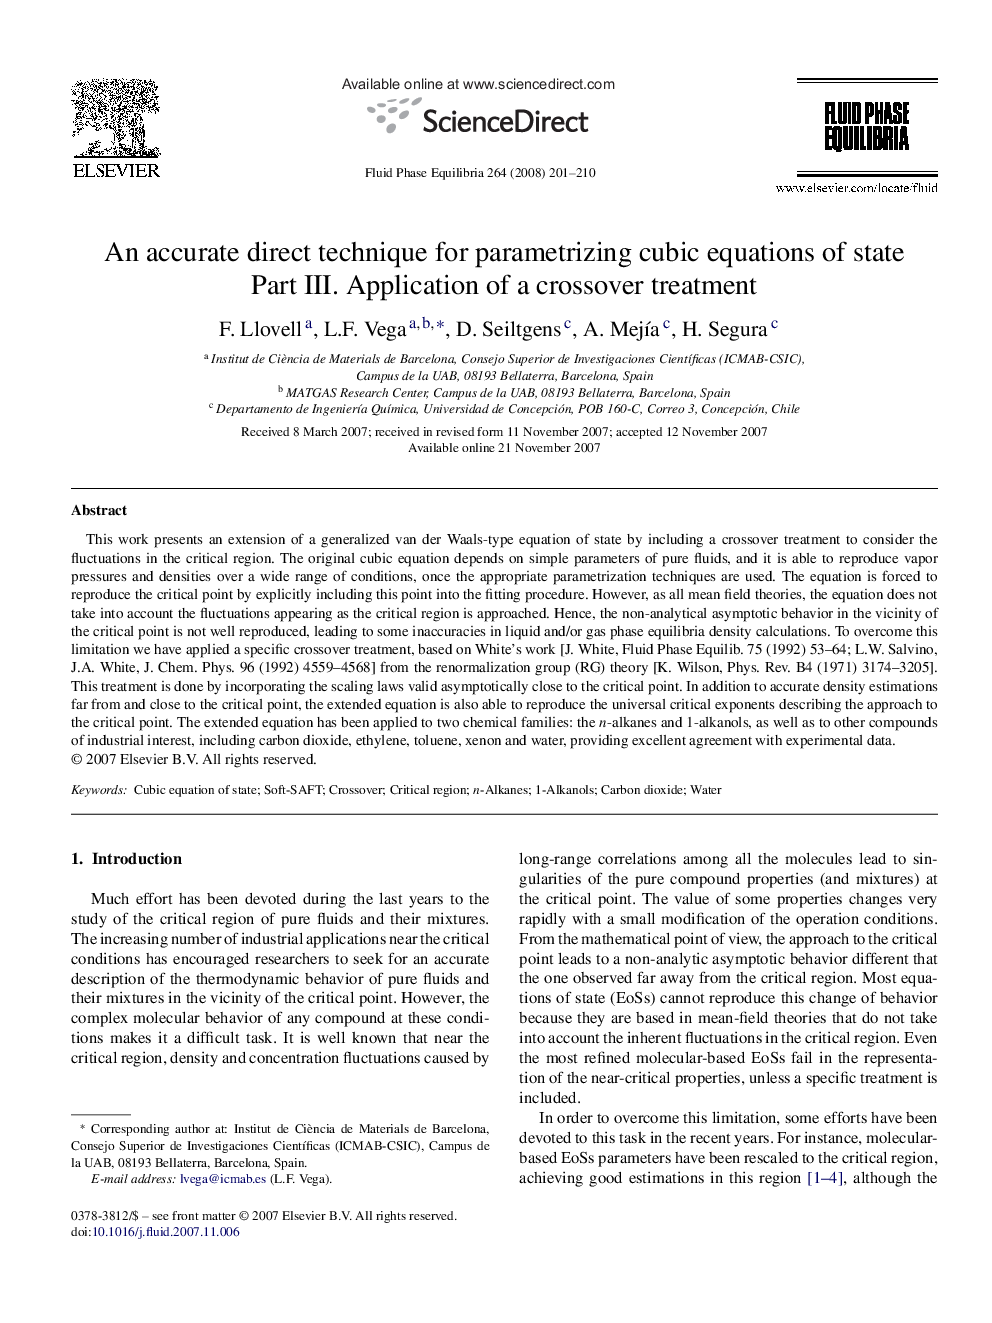 An accurate direct technique for parametrizing cubic equations of state: Part III. Application of a crossover treatment